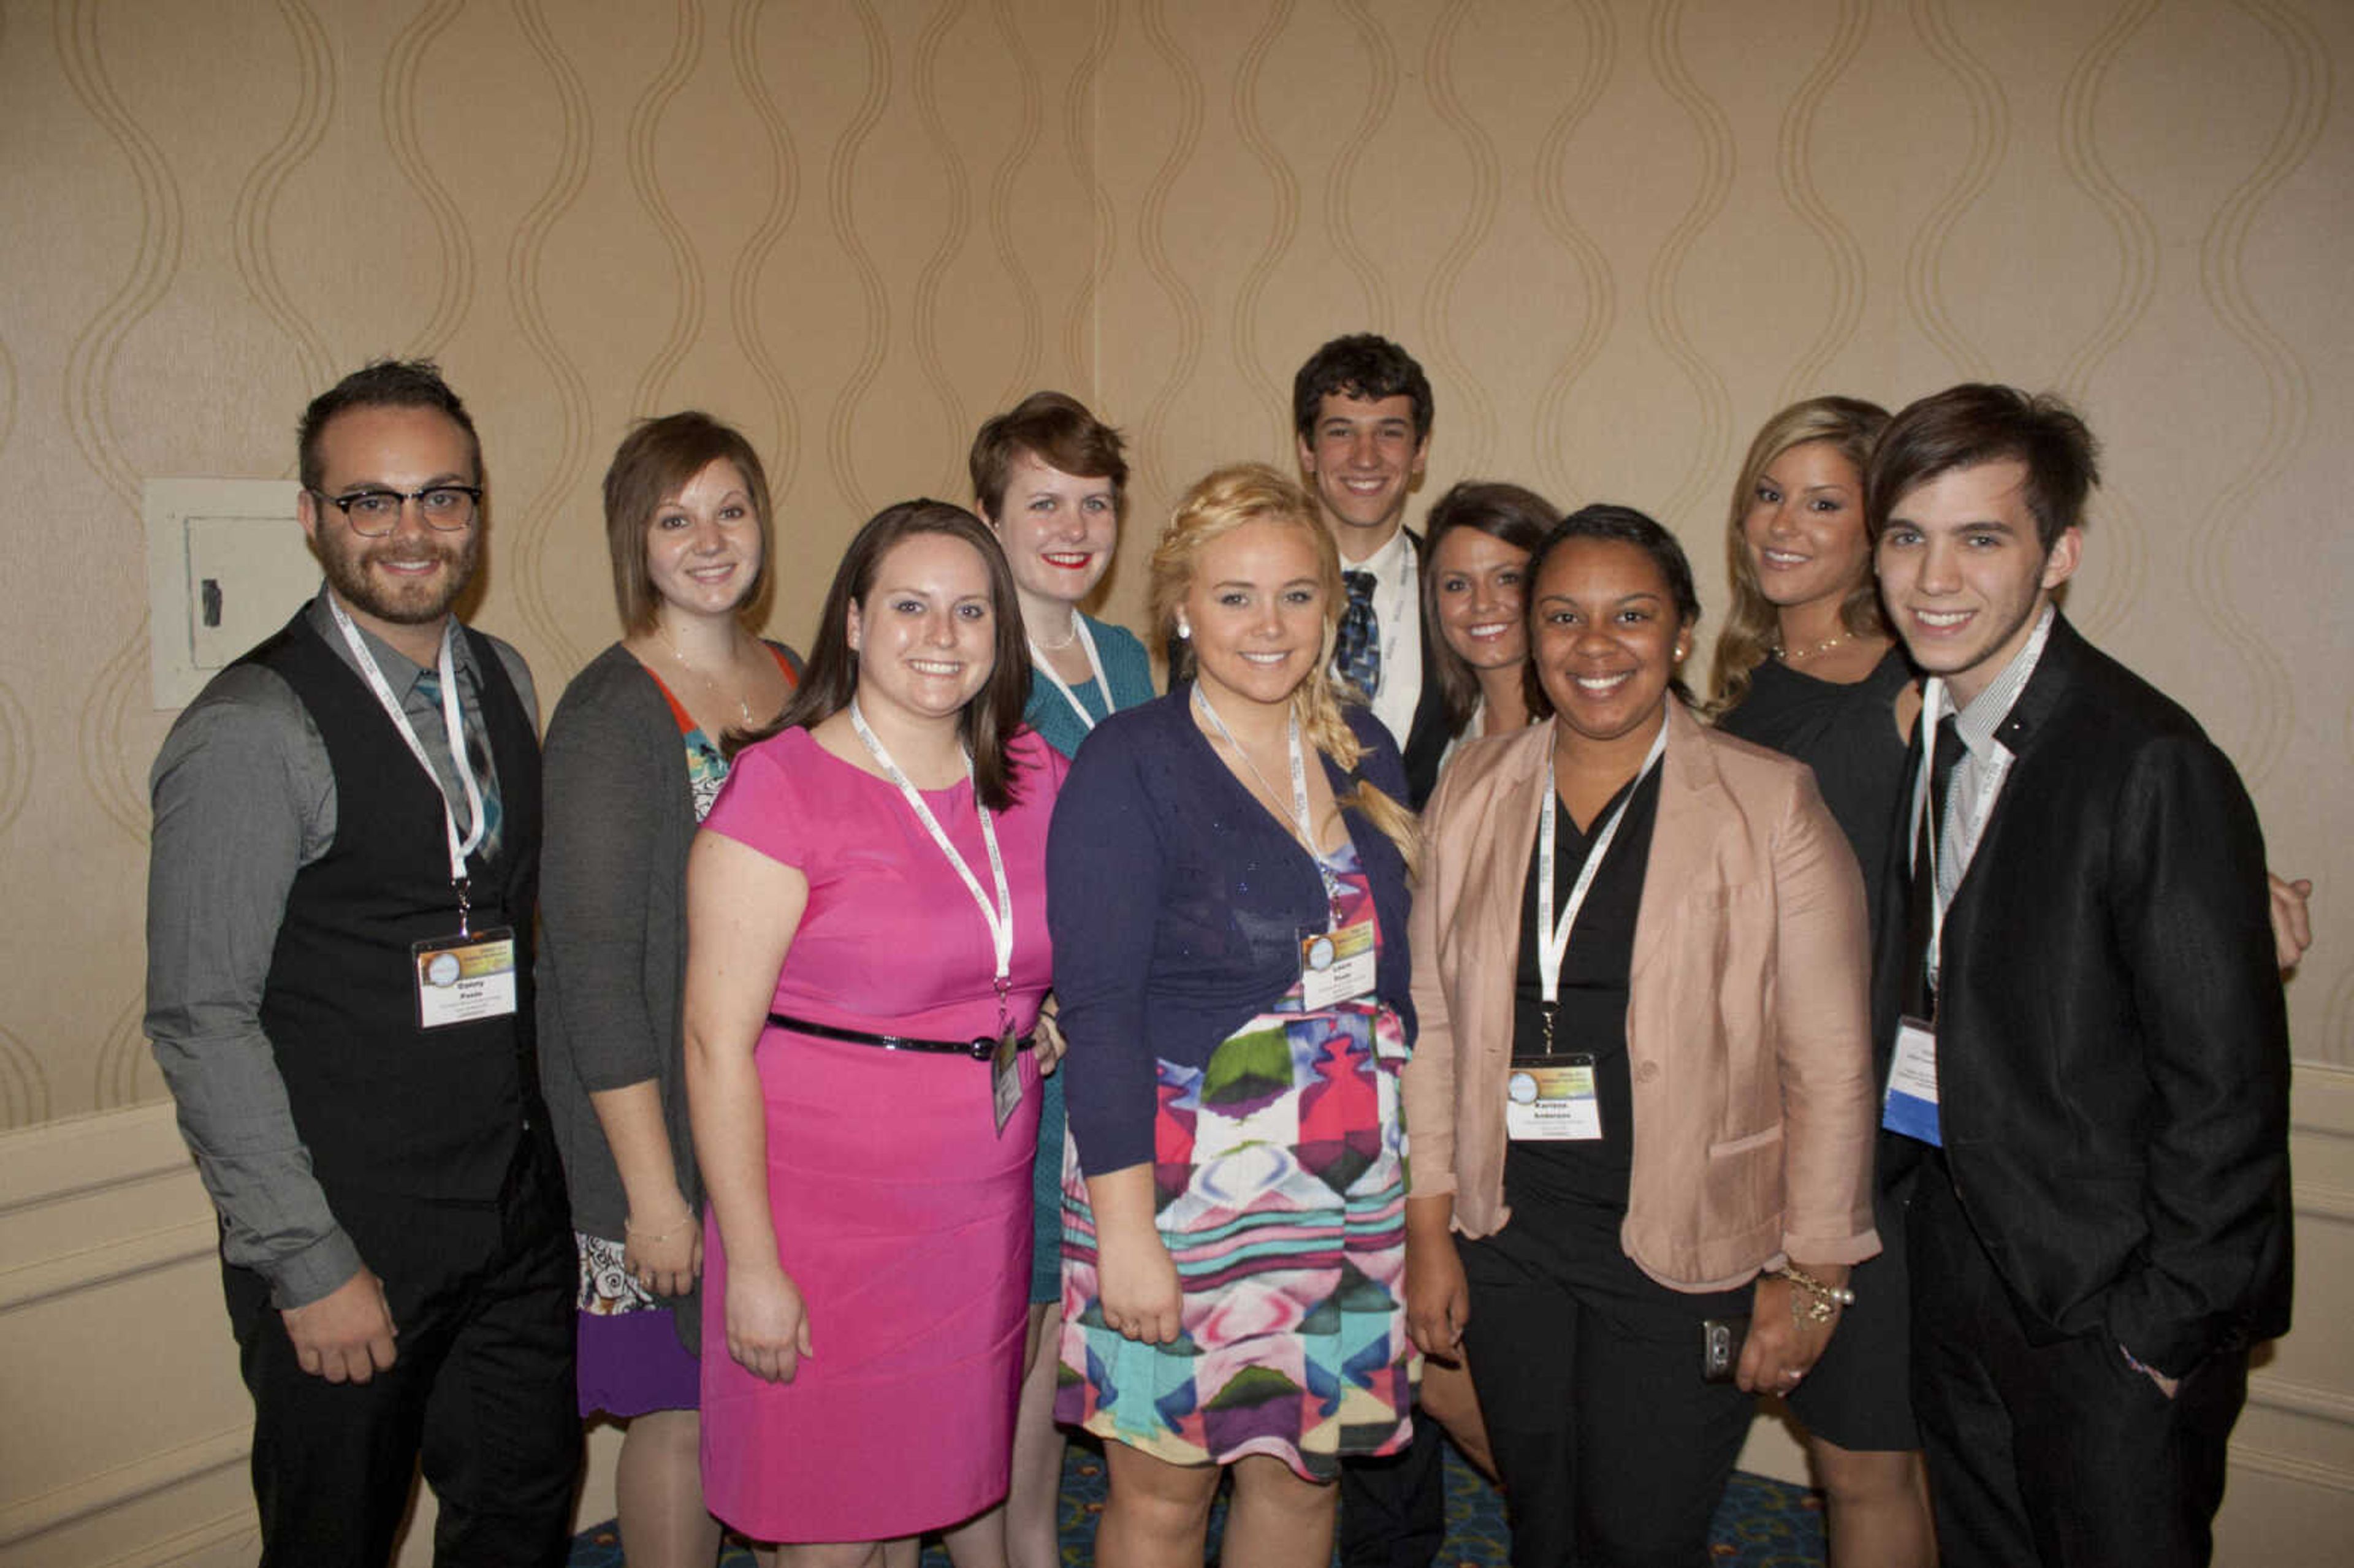 Students from PRSSA went to Orlando, Florida during fall break to network with professionals in their fields.